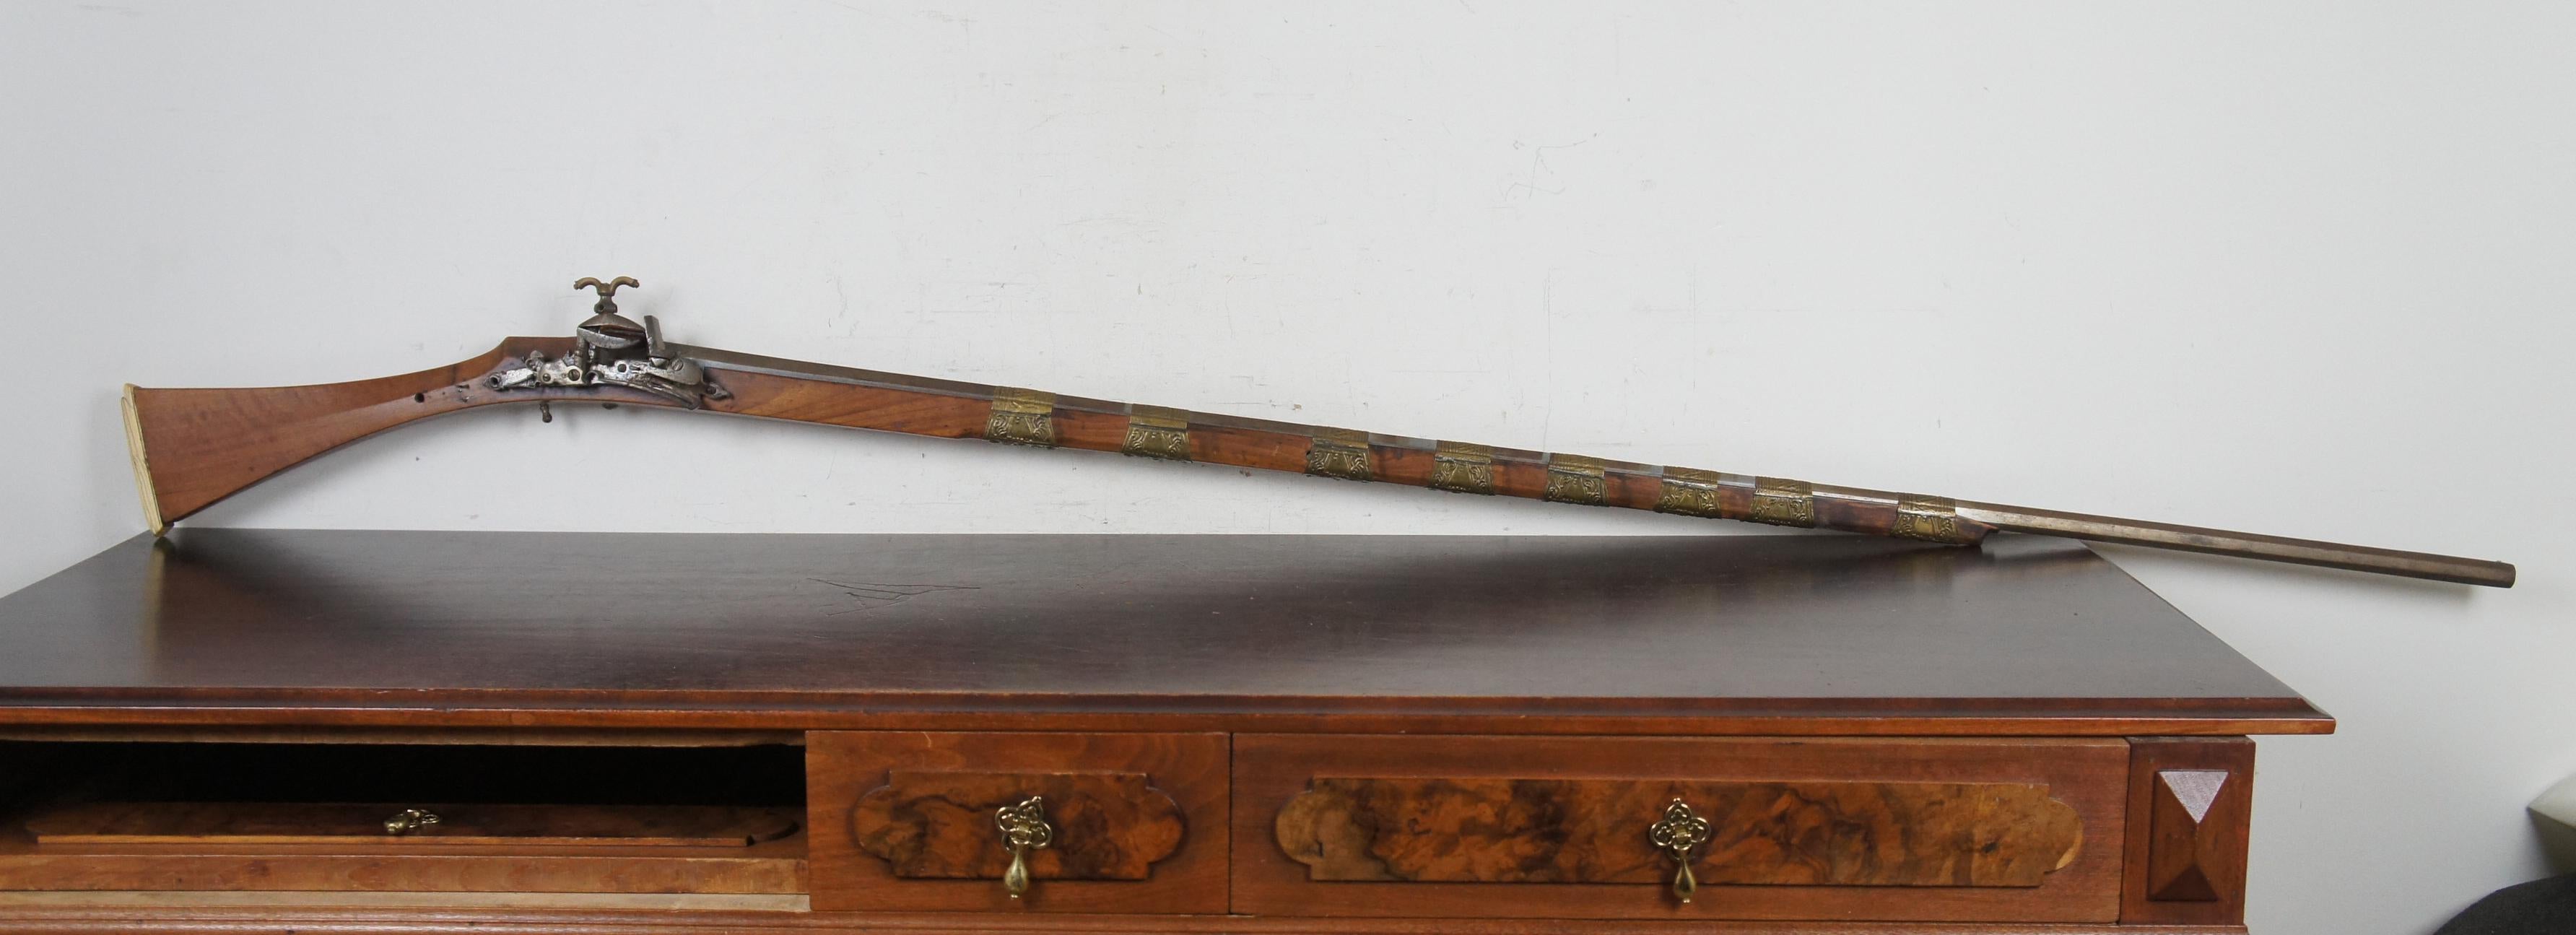 A beautiful late 18th century Moroccan Miquelet Flintlock Rifle. Features a 56